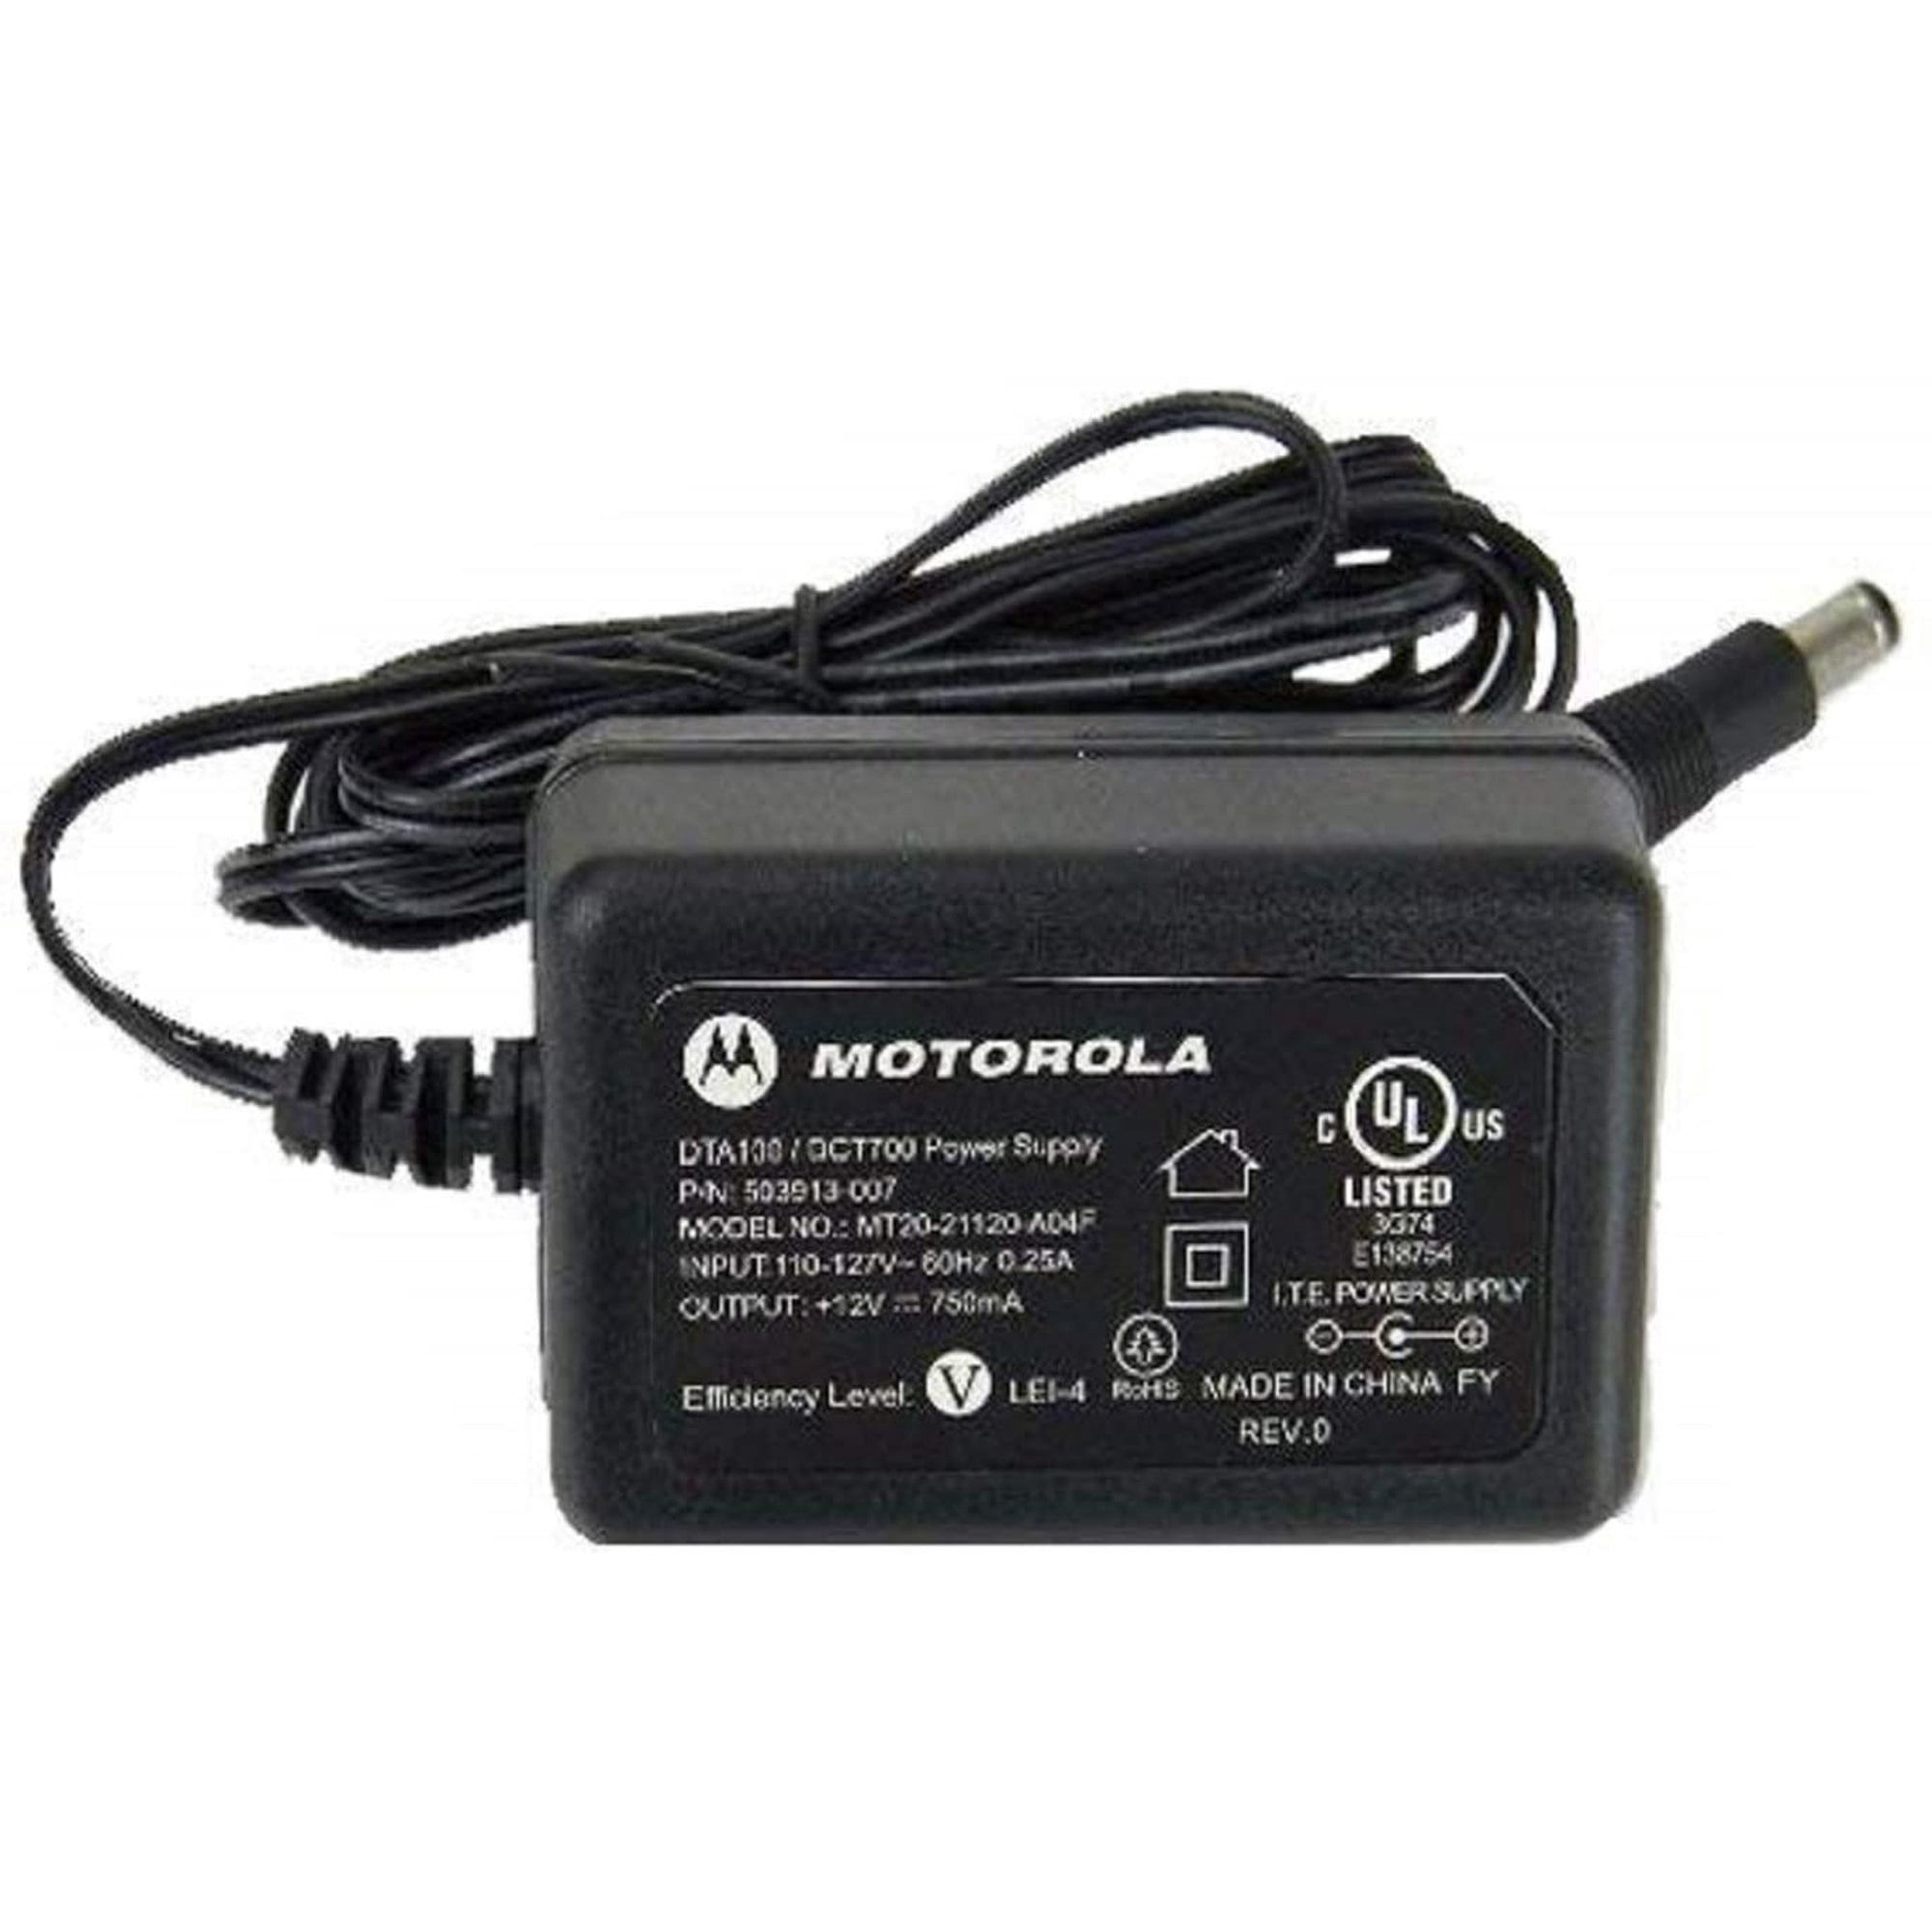 UpBright 12V 0.75A AC/DC Adapter Compatible with Motorola Cable Modem SB5100 SB5120 SB5101 SB5101U MT20-21120-A00F 503913-004 MT20-21120-A04F 503913-007 DTA100 DTA199 DCT700 12.0V 750mA Power Supply